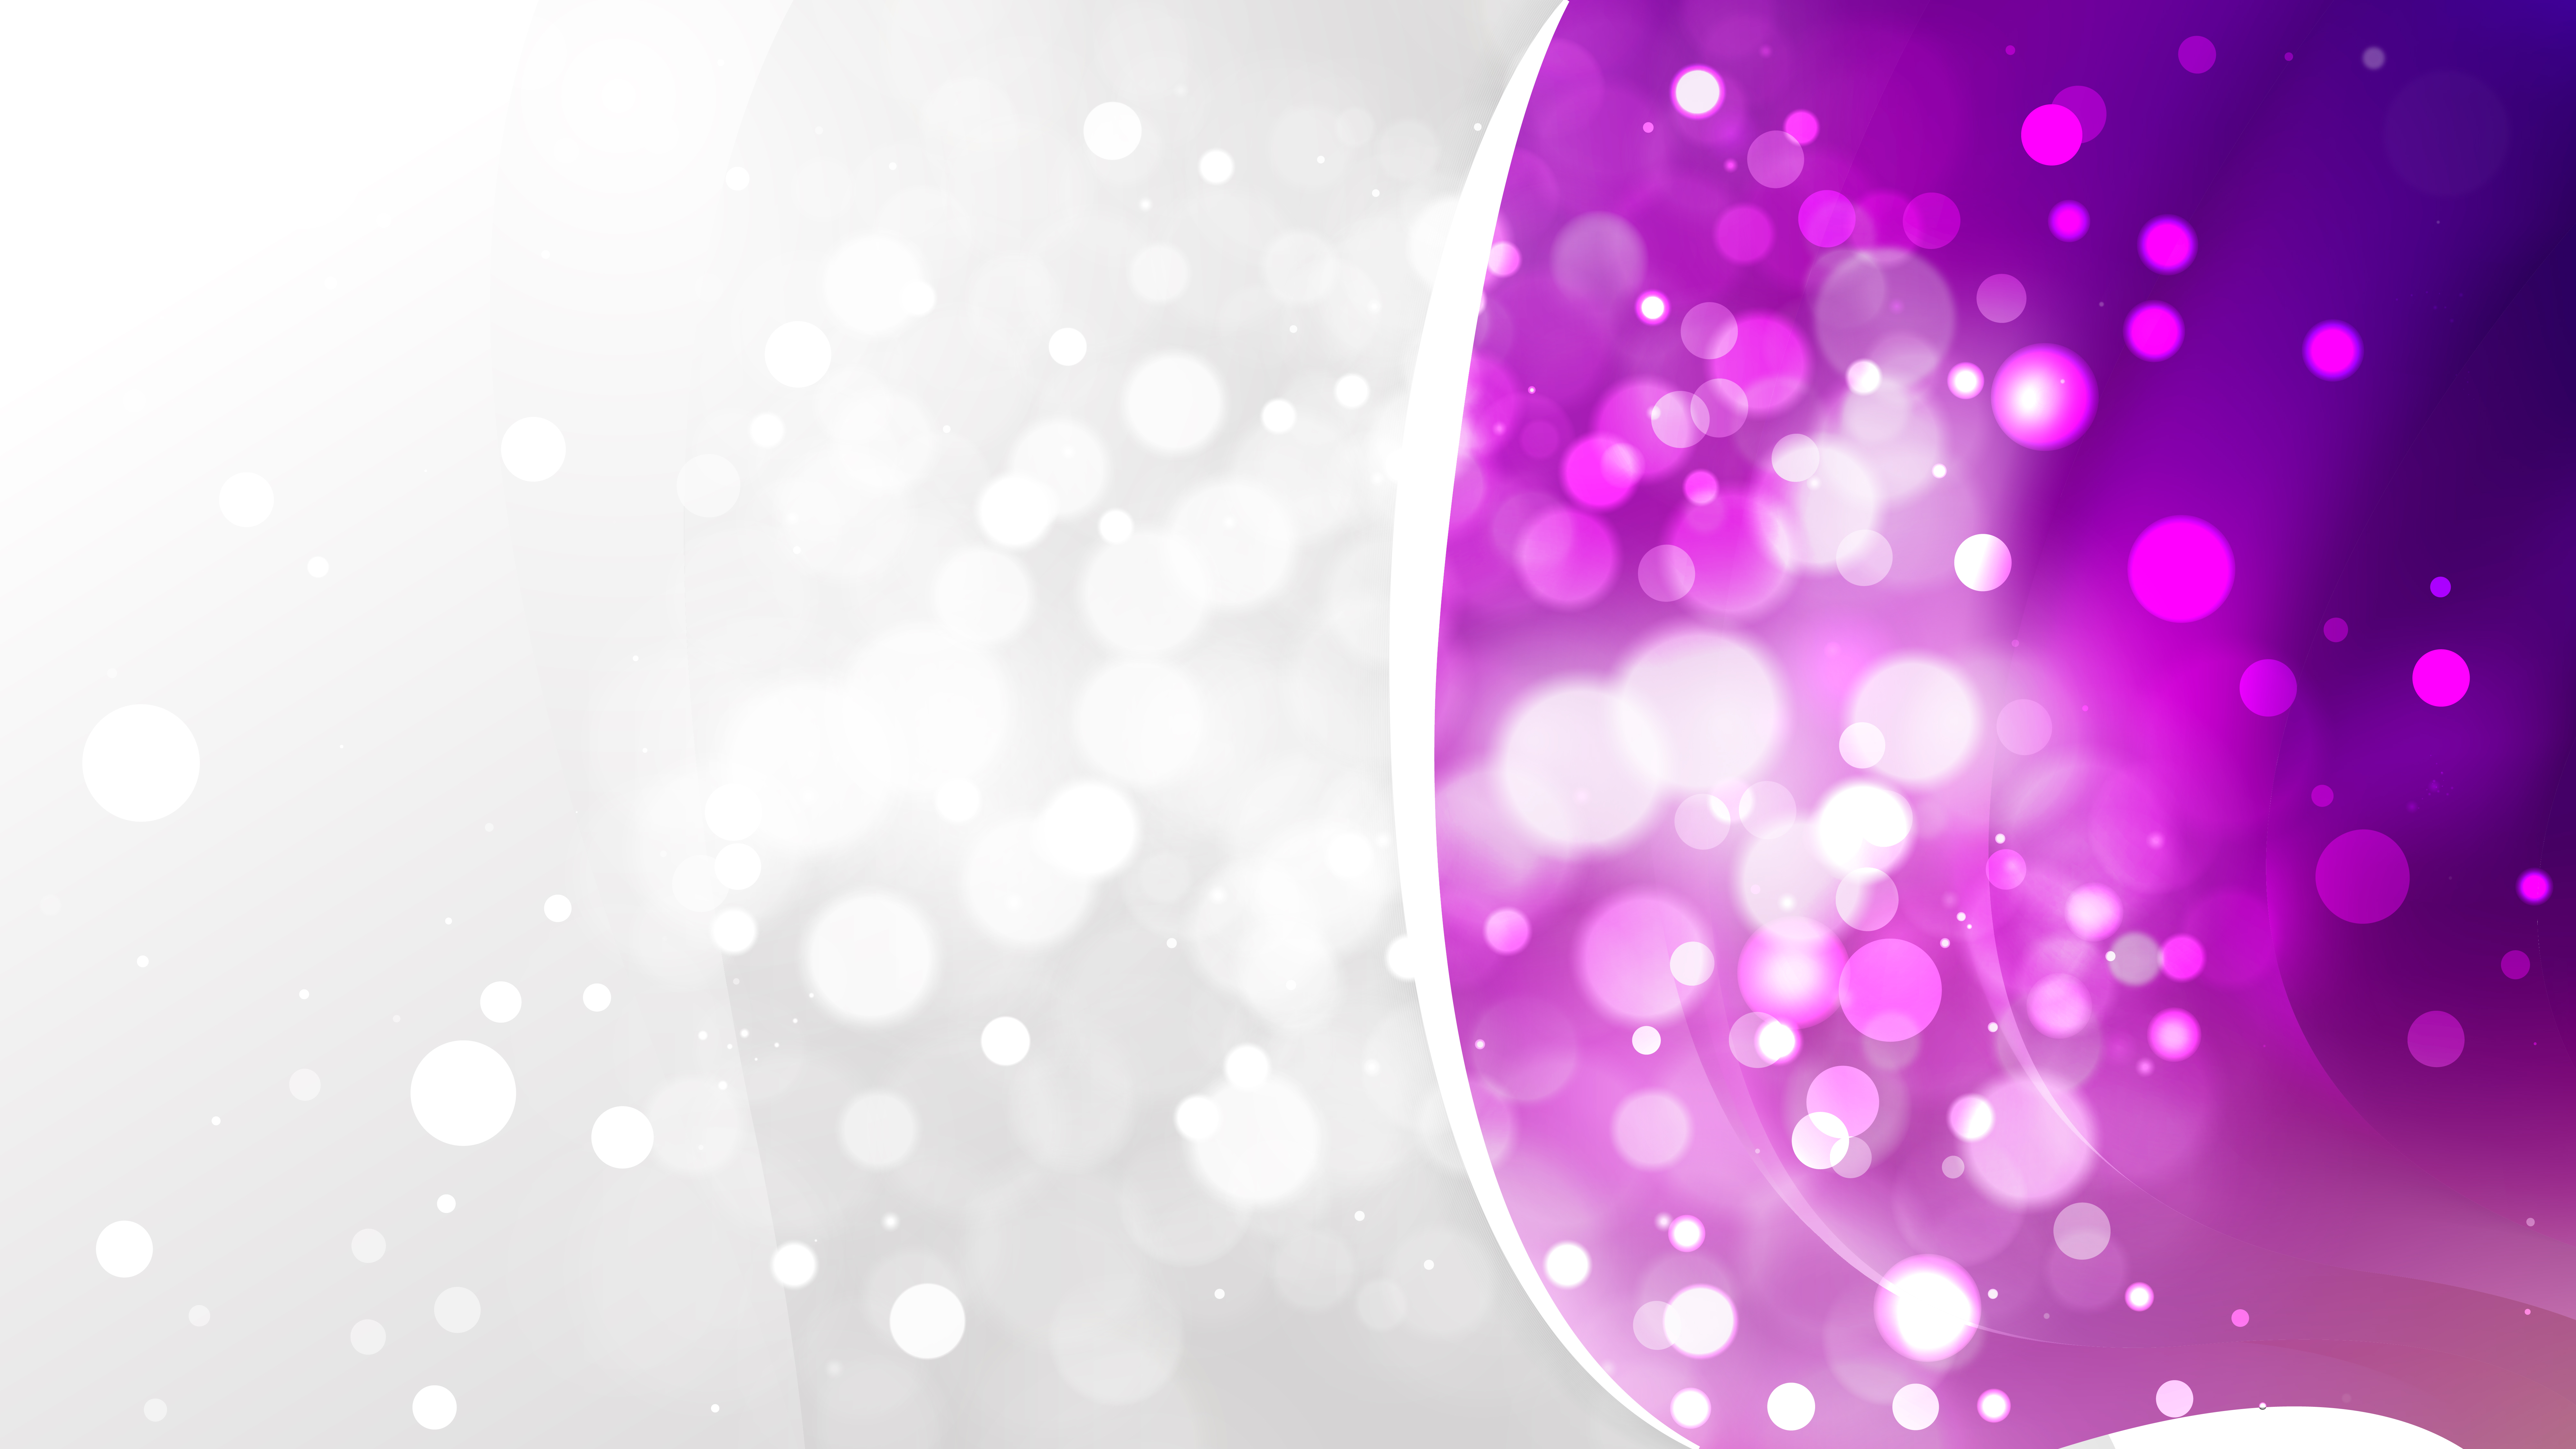 Free Abstract Purple Blurry Lights Background Image